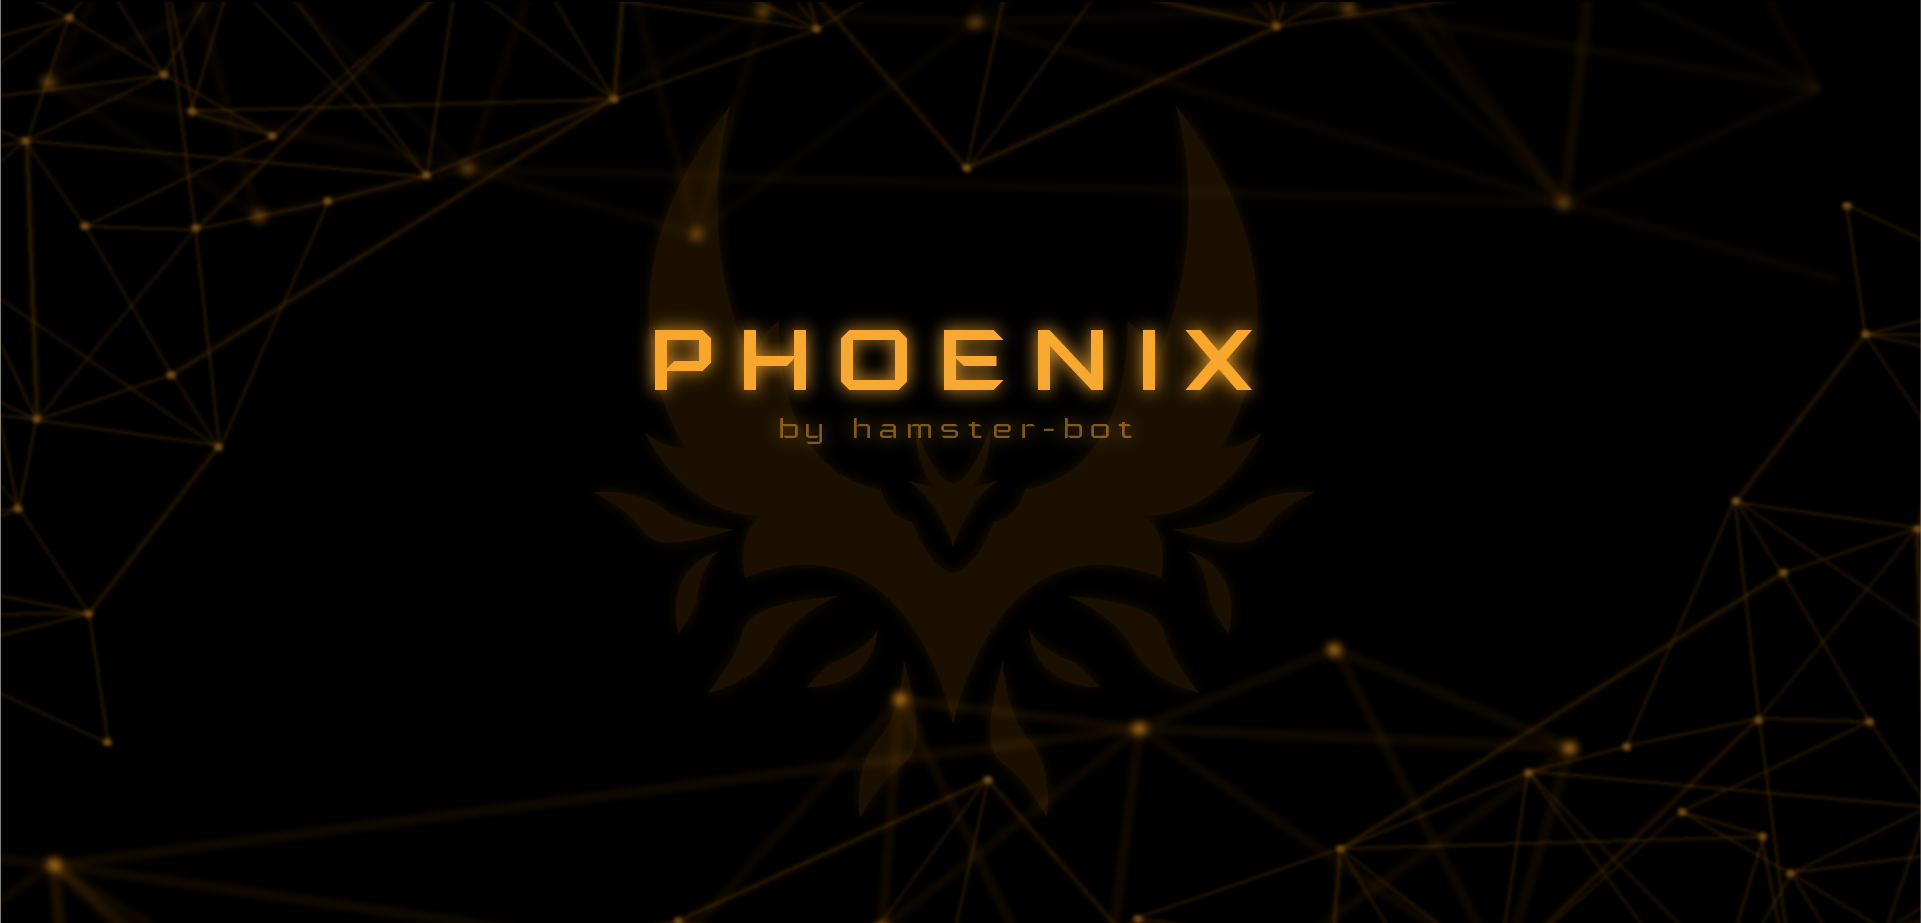 PHOENIX by hamster-bot Annual Report